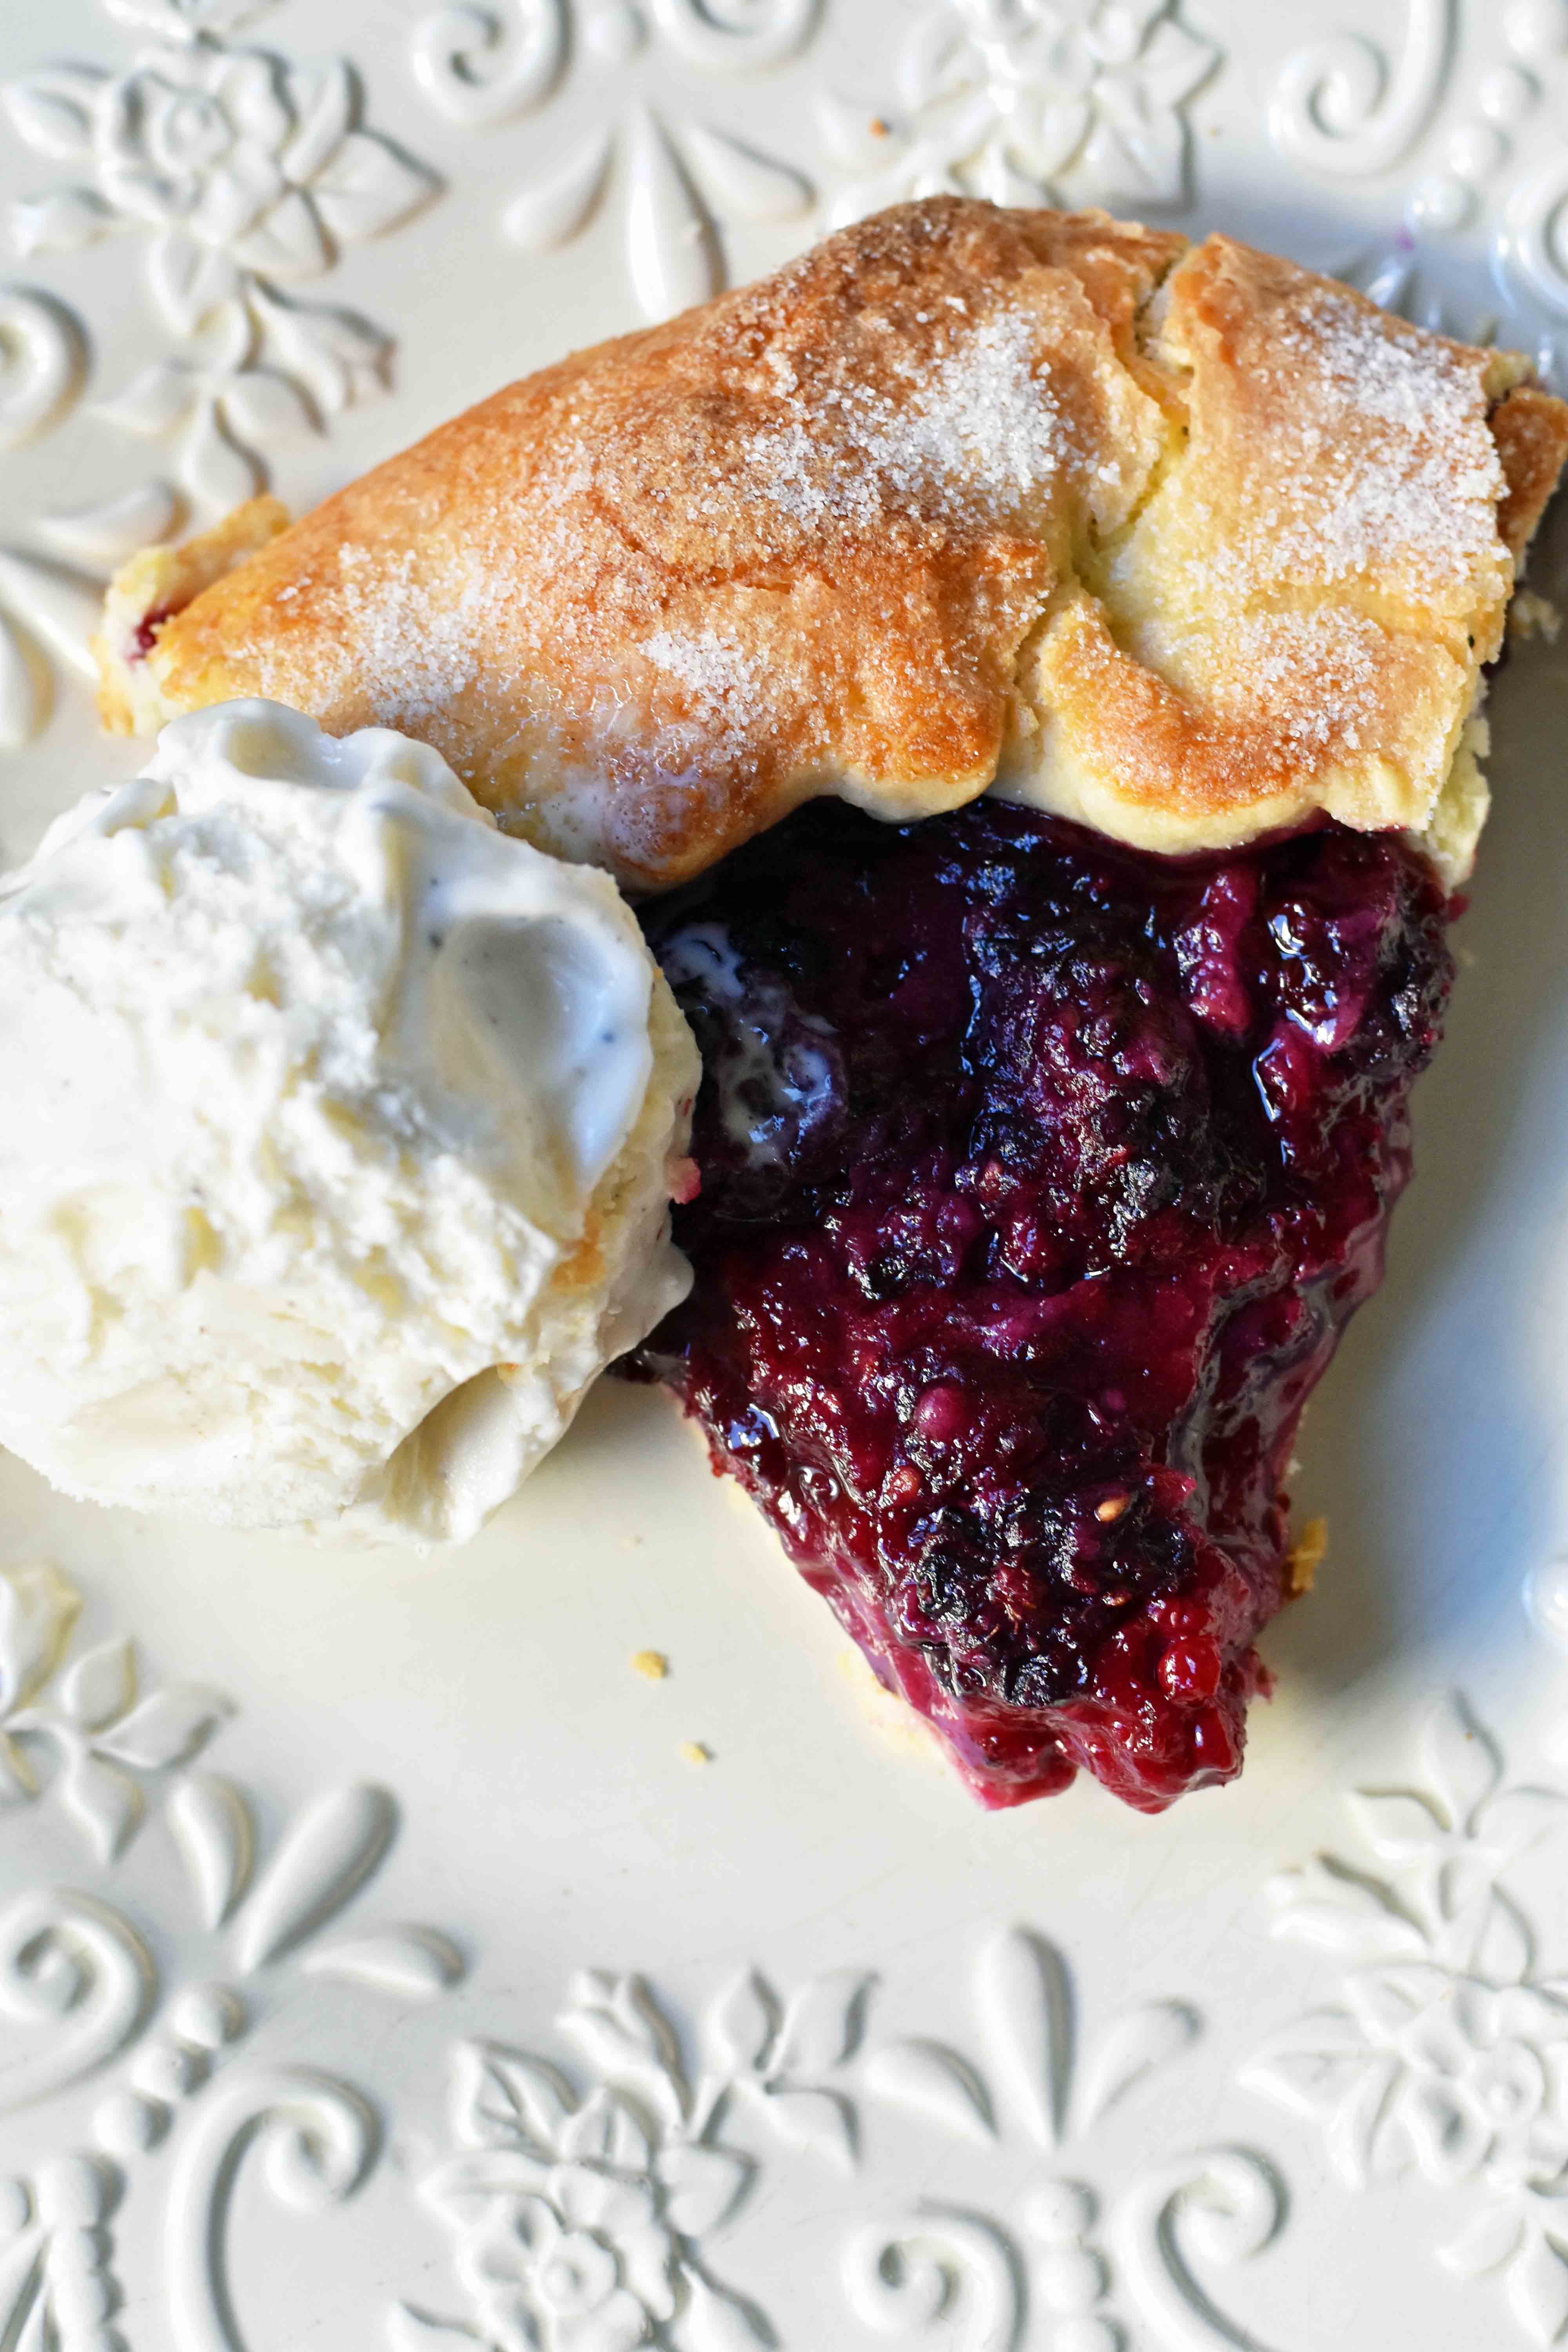 Blackberry Galette Crostata. An easy rustic summer dessert made with homemade buttery flaky pie crust with a sweet blackberry filling topped with vanilla bean ice cream. A much easier blackberry pie! www.modernhoney.com #galette #crostata #blackberrycrostata #blackberrygalette #summerdessert #berrydessert